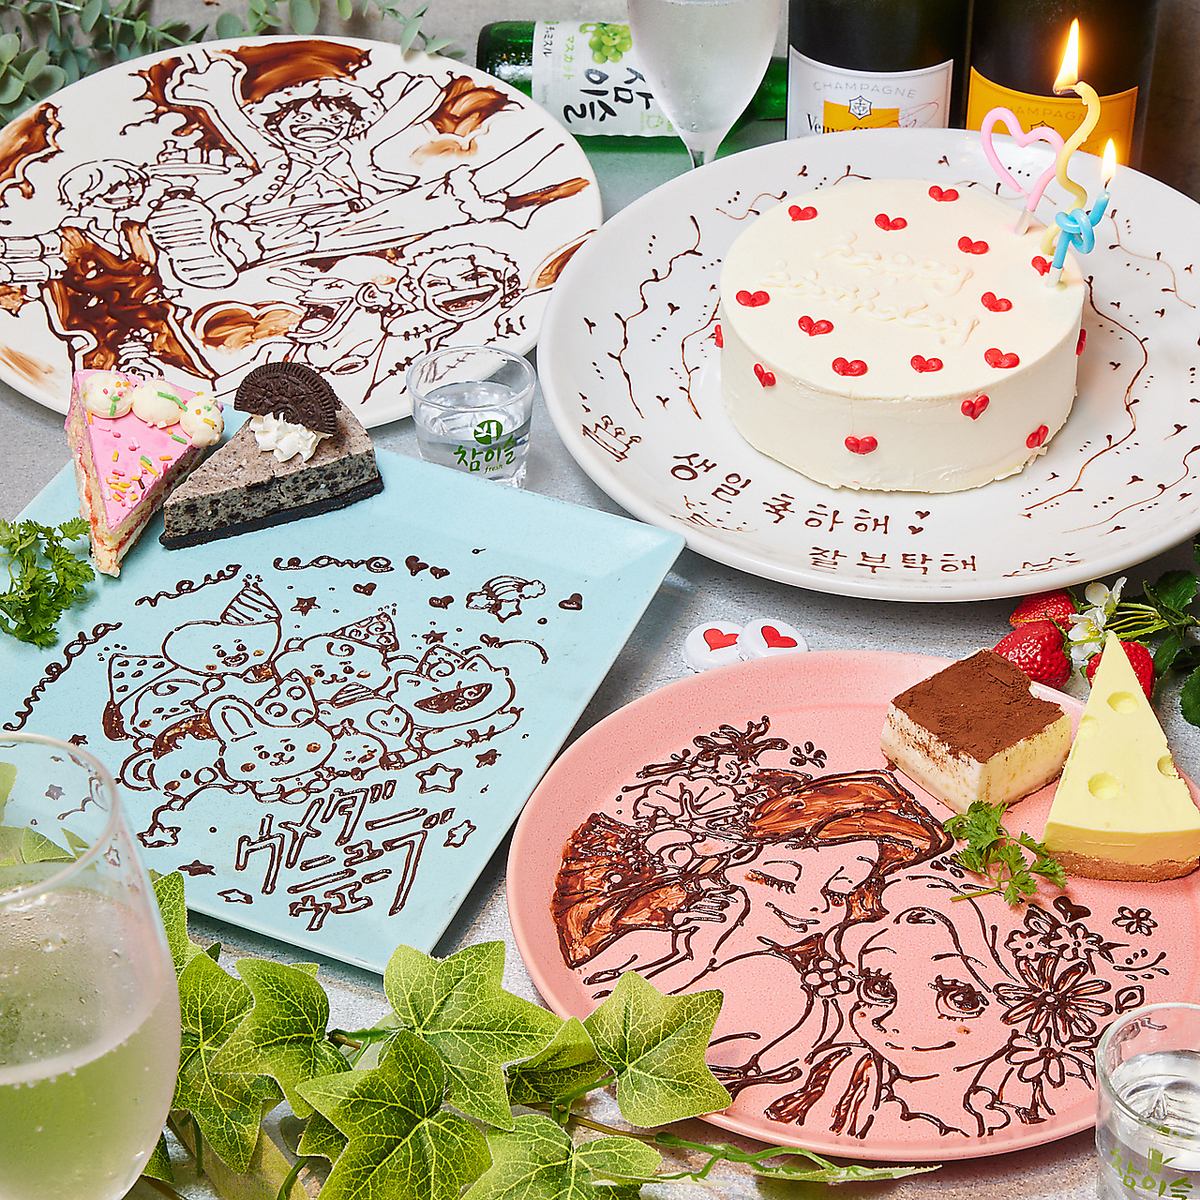 Get an original dessert plate for 1,500 yen by using the coupon♪